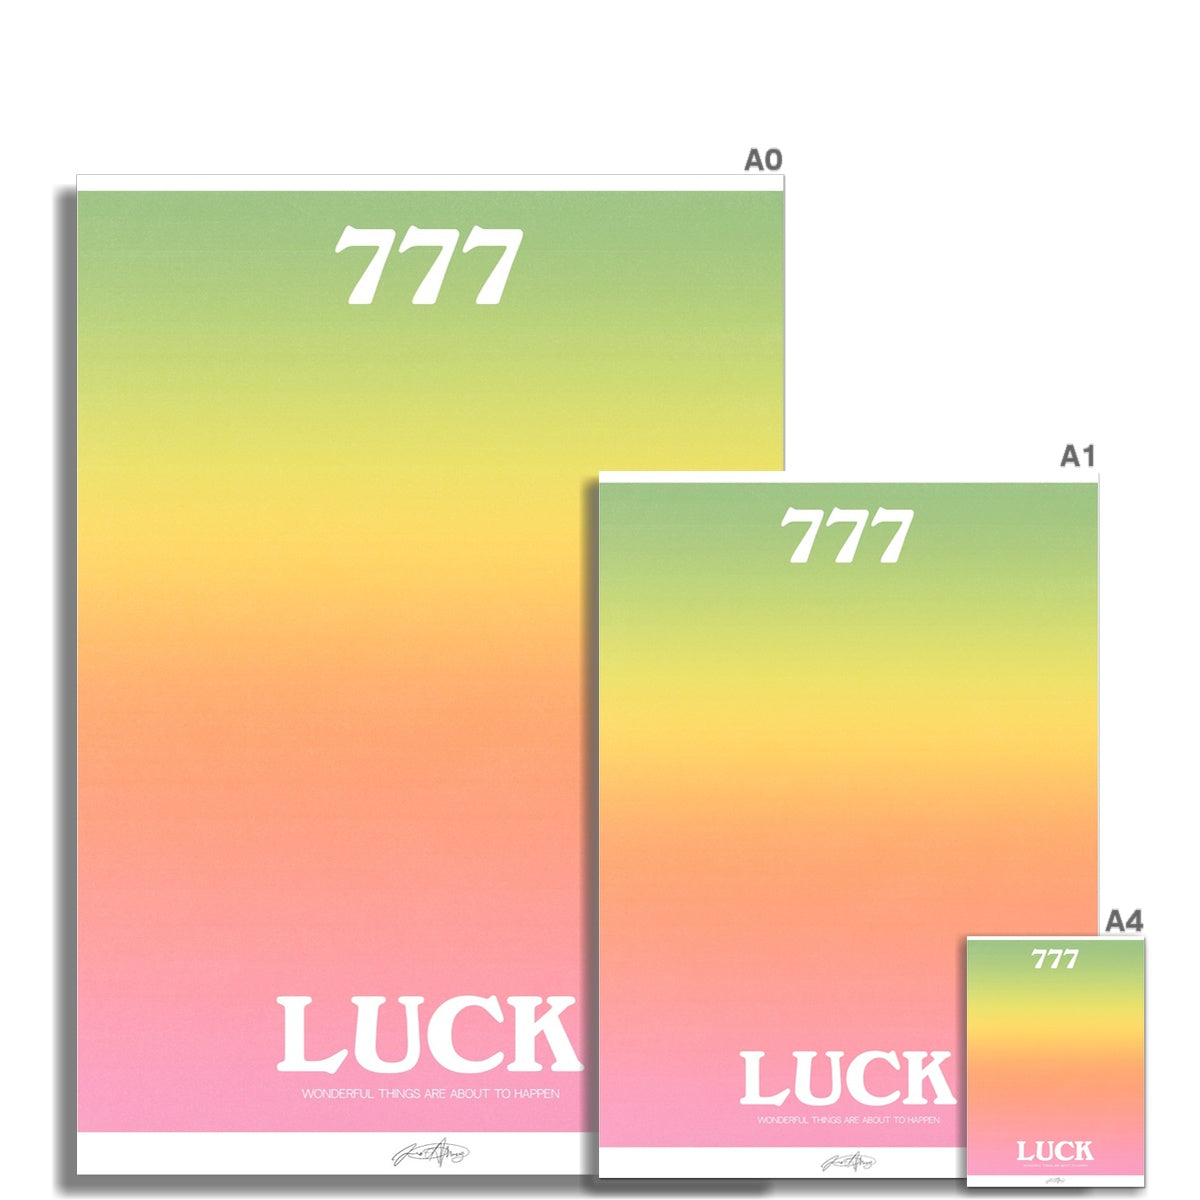 An angel number art print with a gradient aura. Add a touch of angel energy to your walls with a angel number auras. The perfect wall art posters to create a soft and dreamy aesthetic with your apartment or dorm decor. 777 Luck: Wonderful Things Are About To Happen